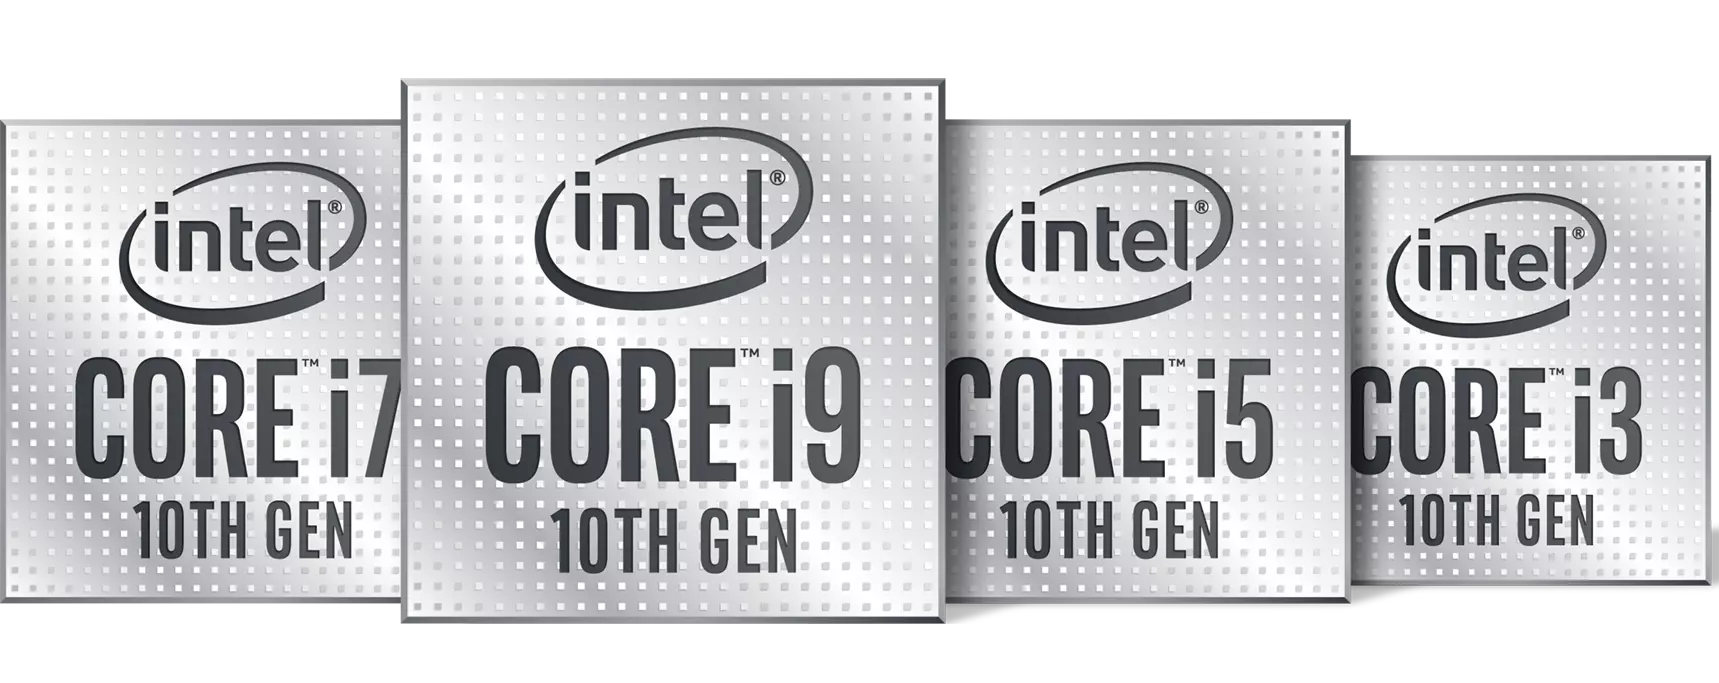 Intel's 10th Gen CPUs: Everything You Need To Know